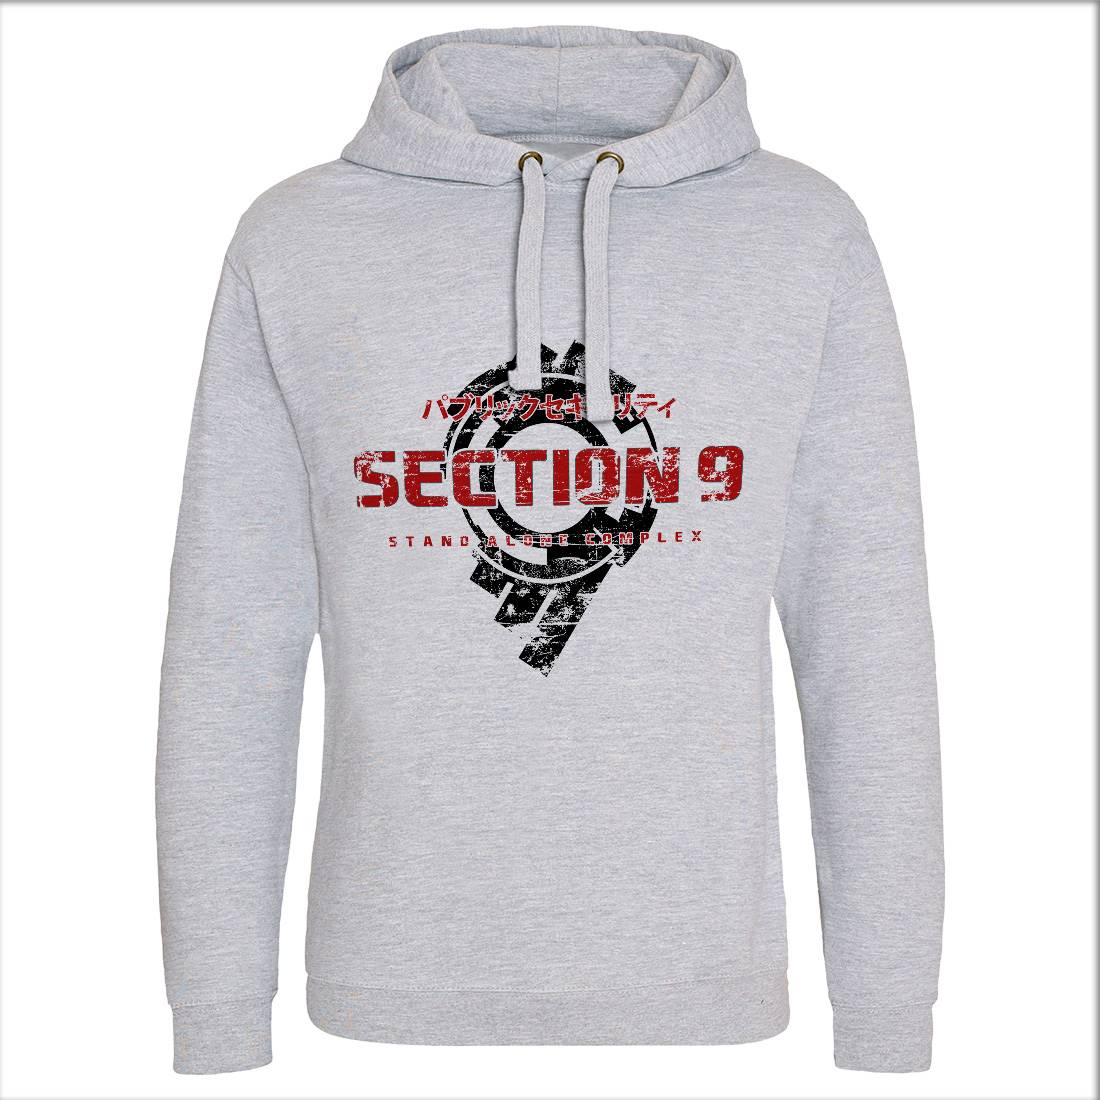 Section 9 Mens Hoodie Without Pocket Space D193